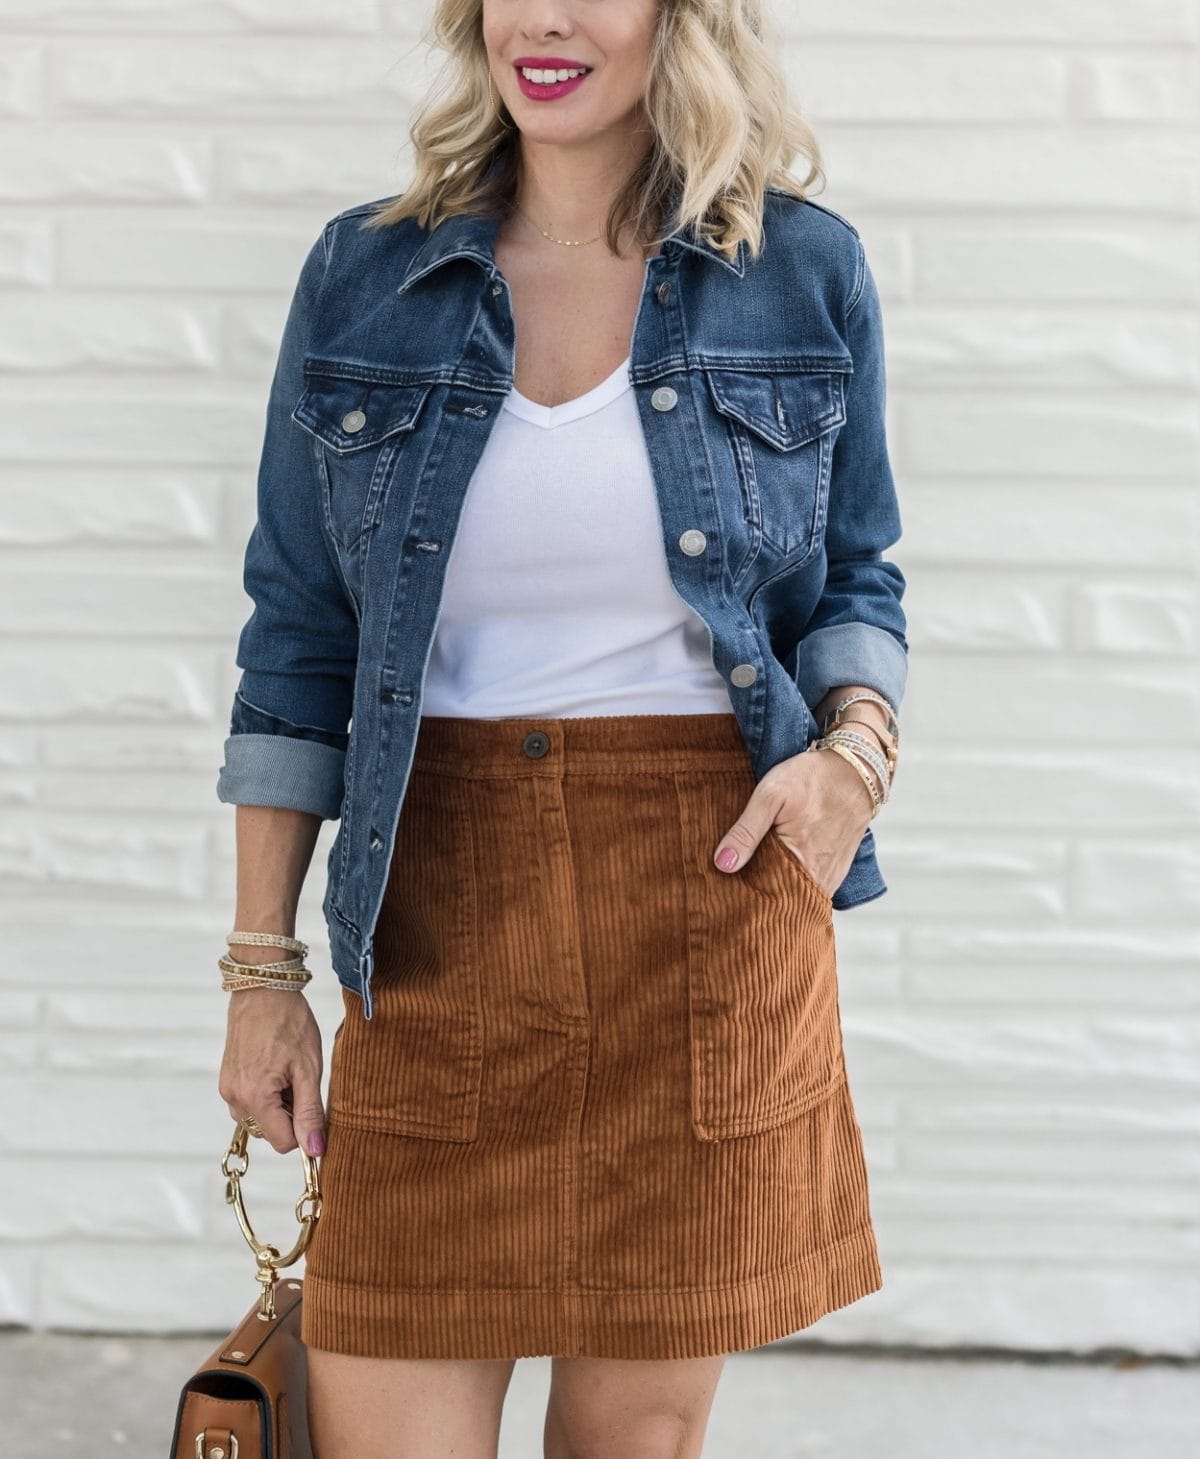 white t-shirt with corduroy skirt and jean jacket